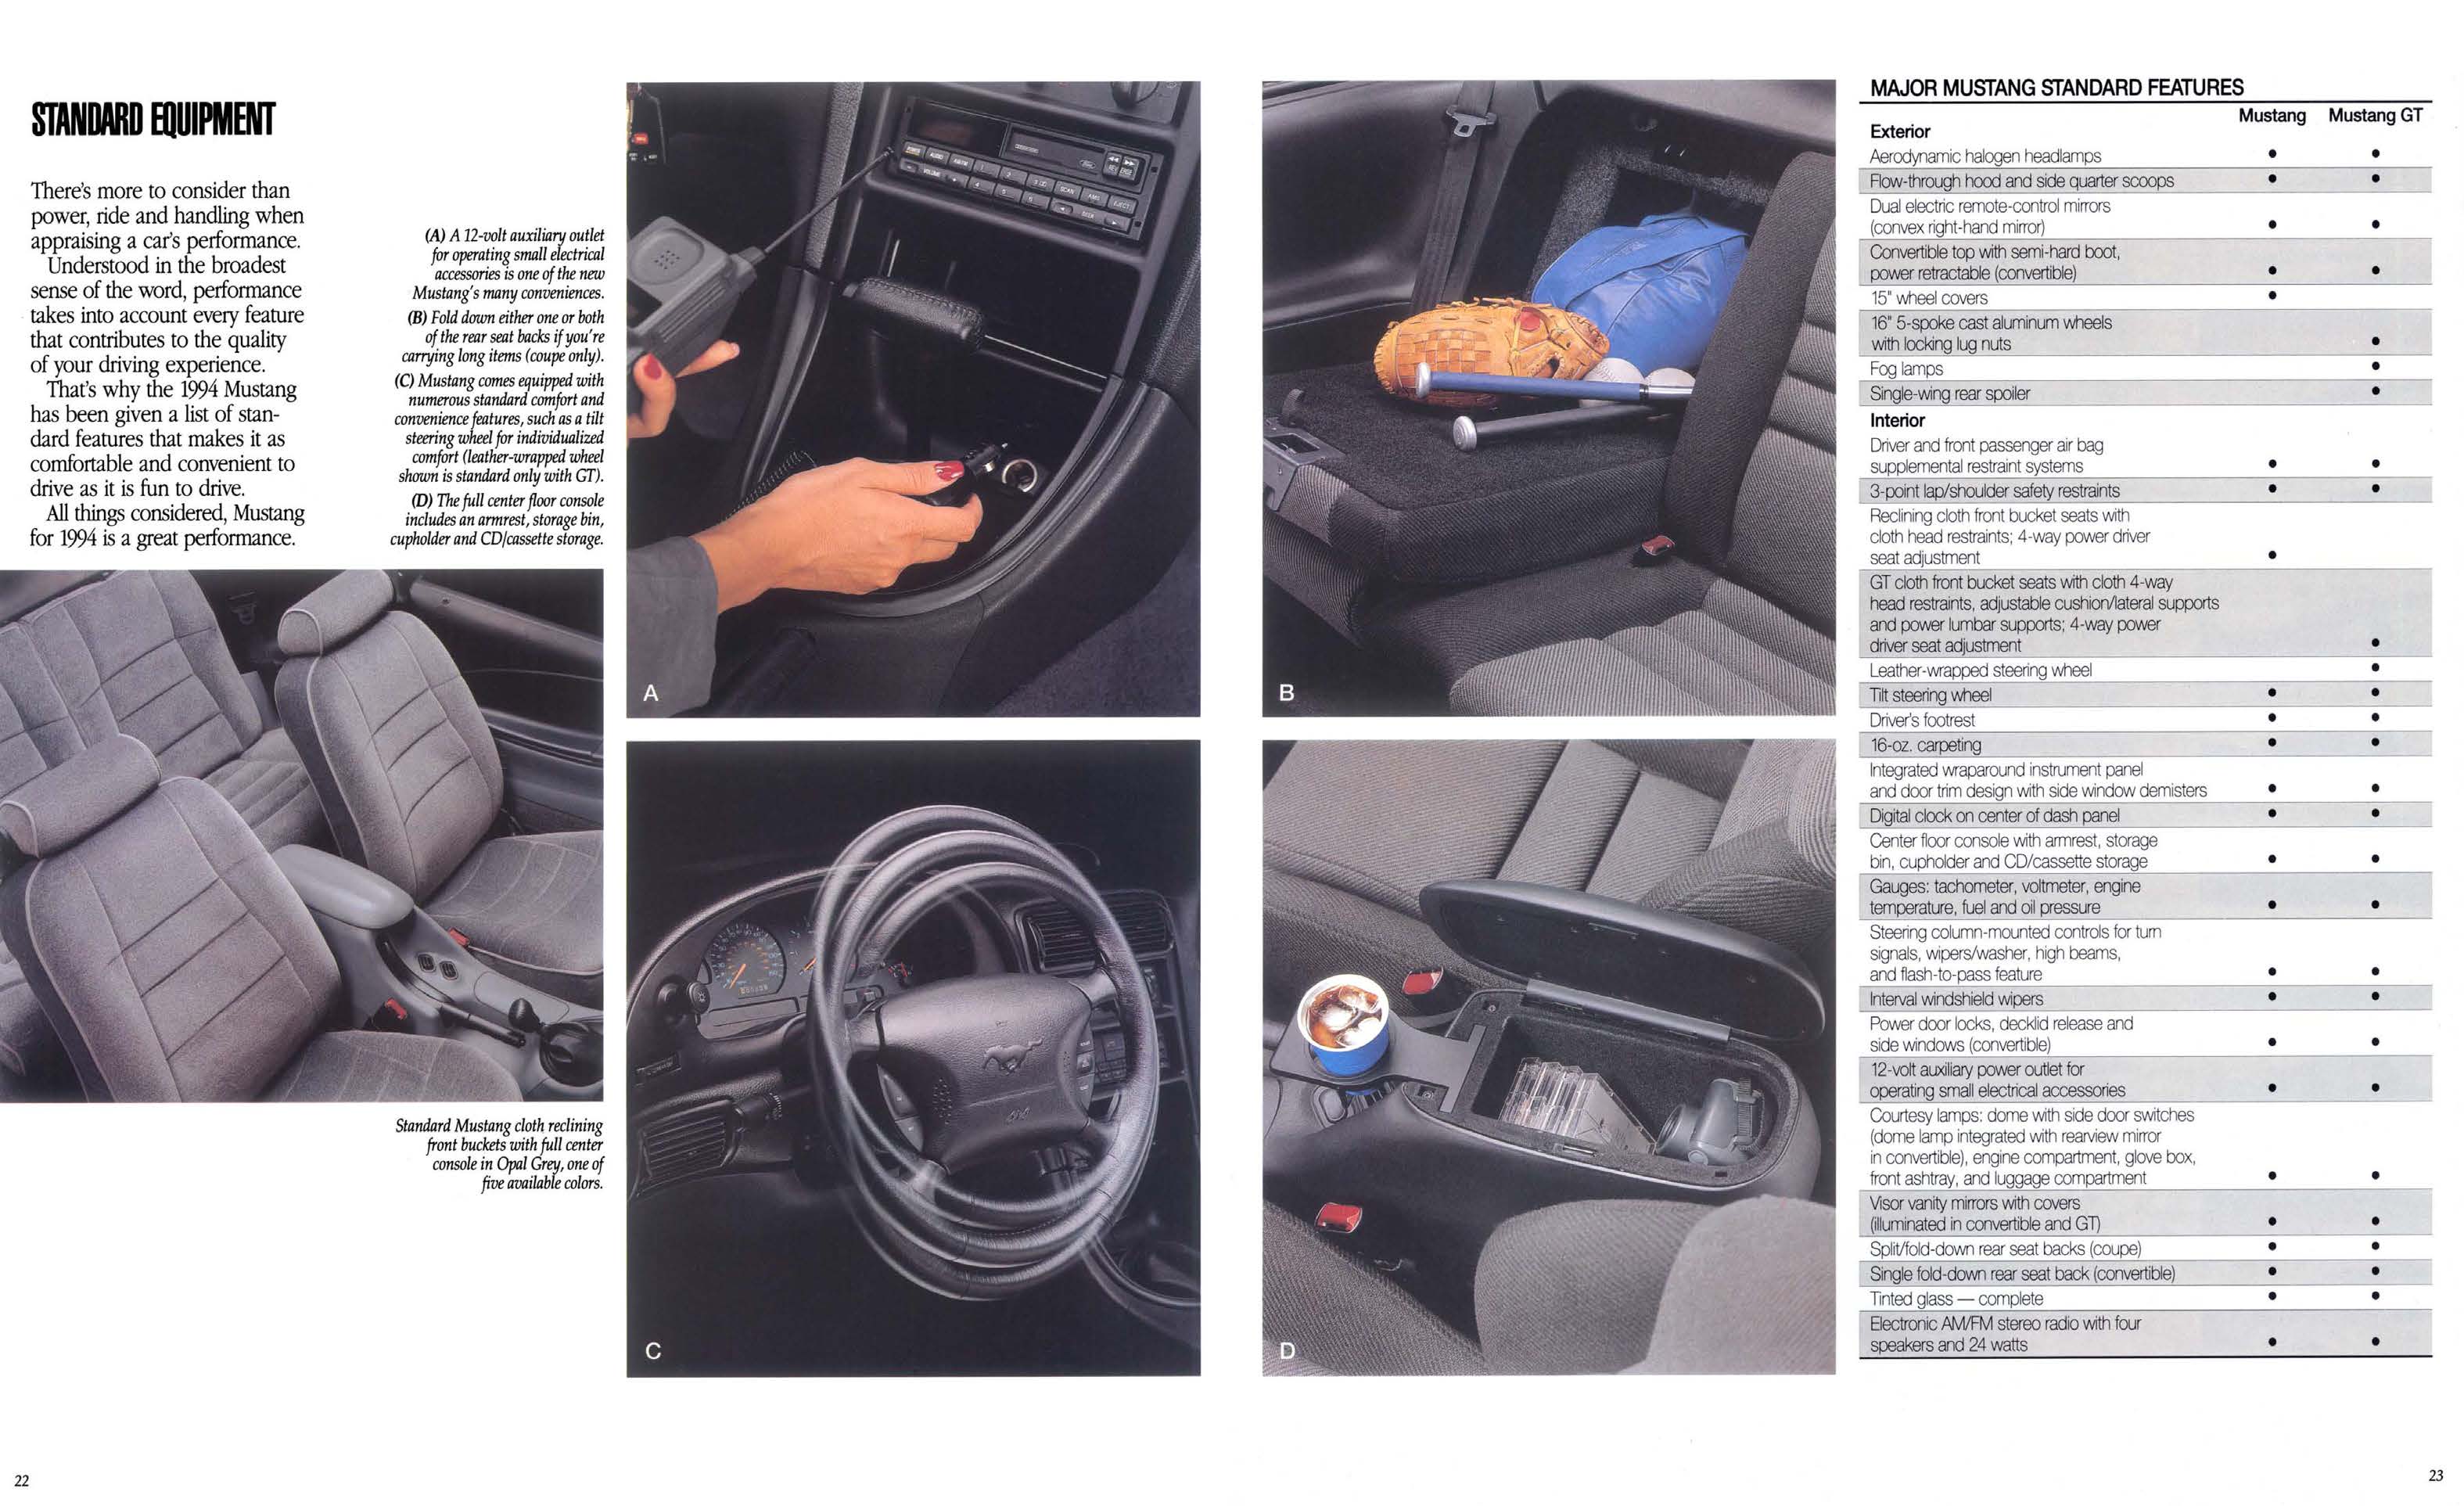 1994_Ford_Mustang-22-23